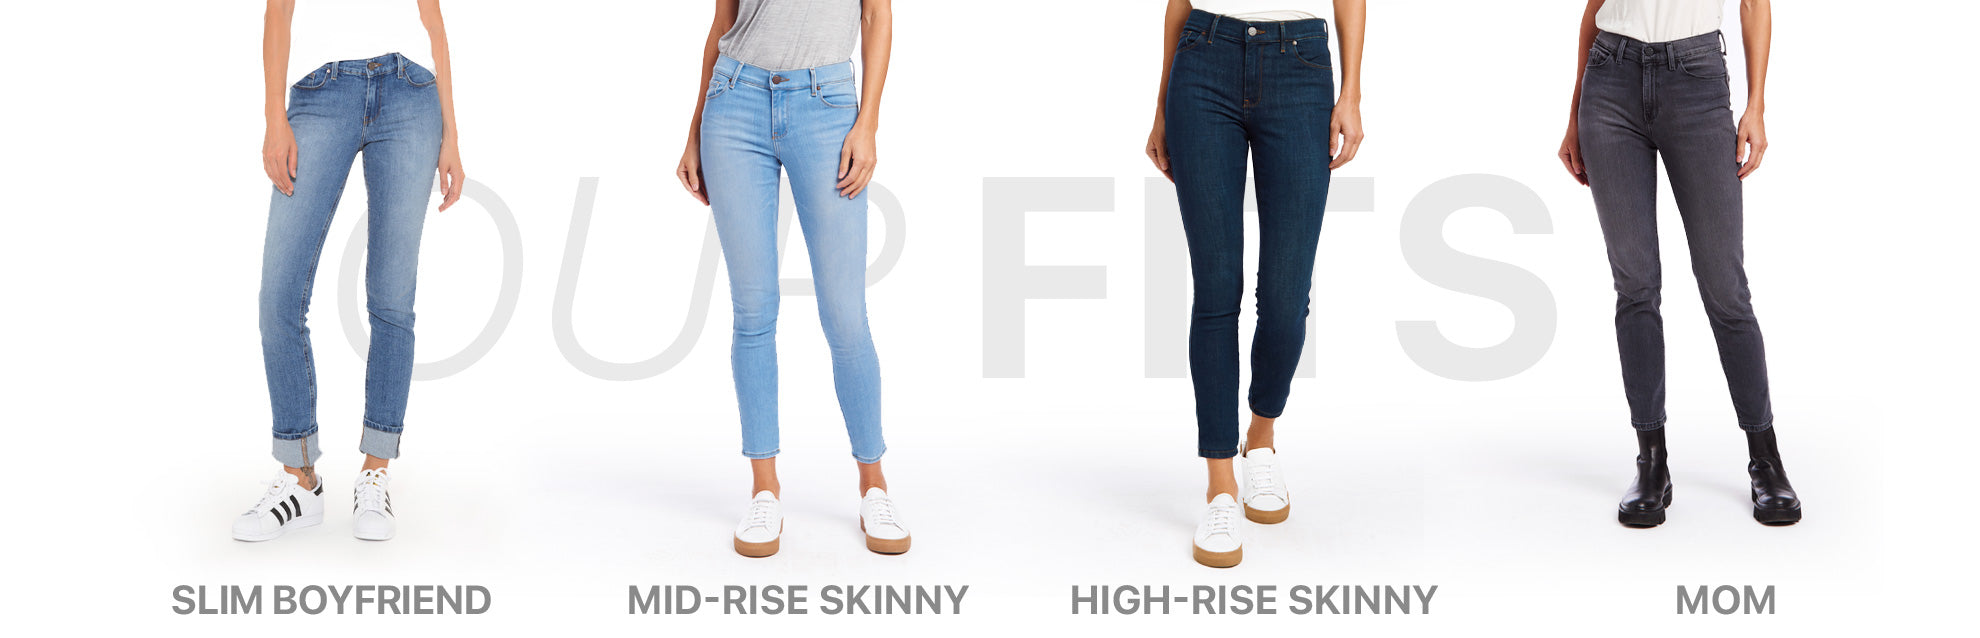 Jeans Fit Guide for Women